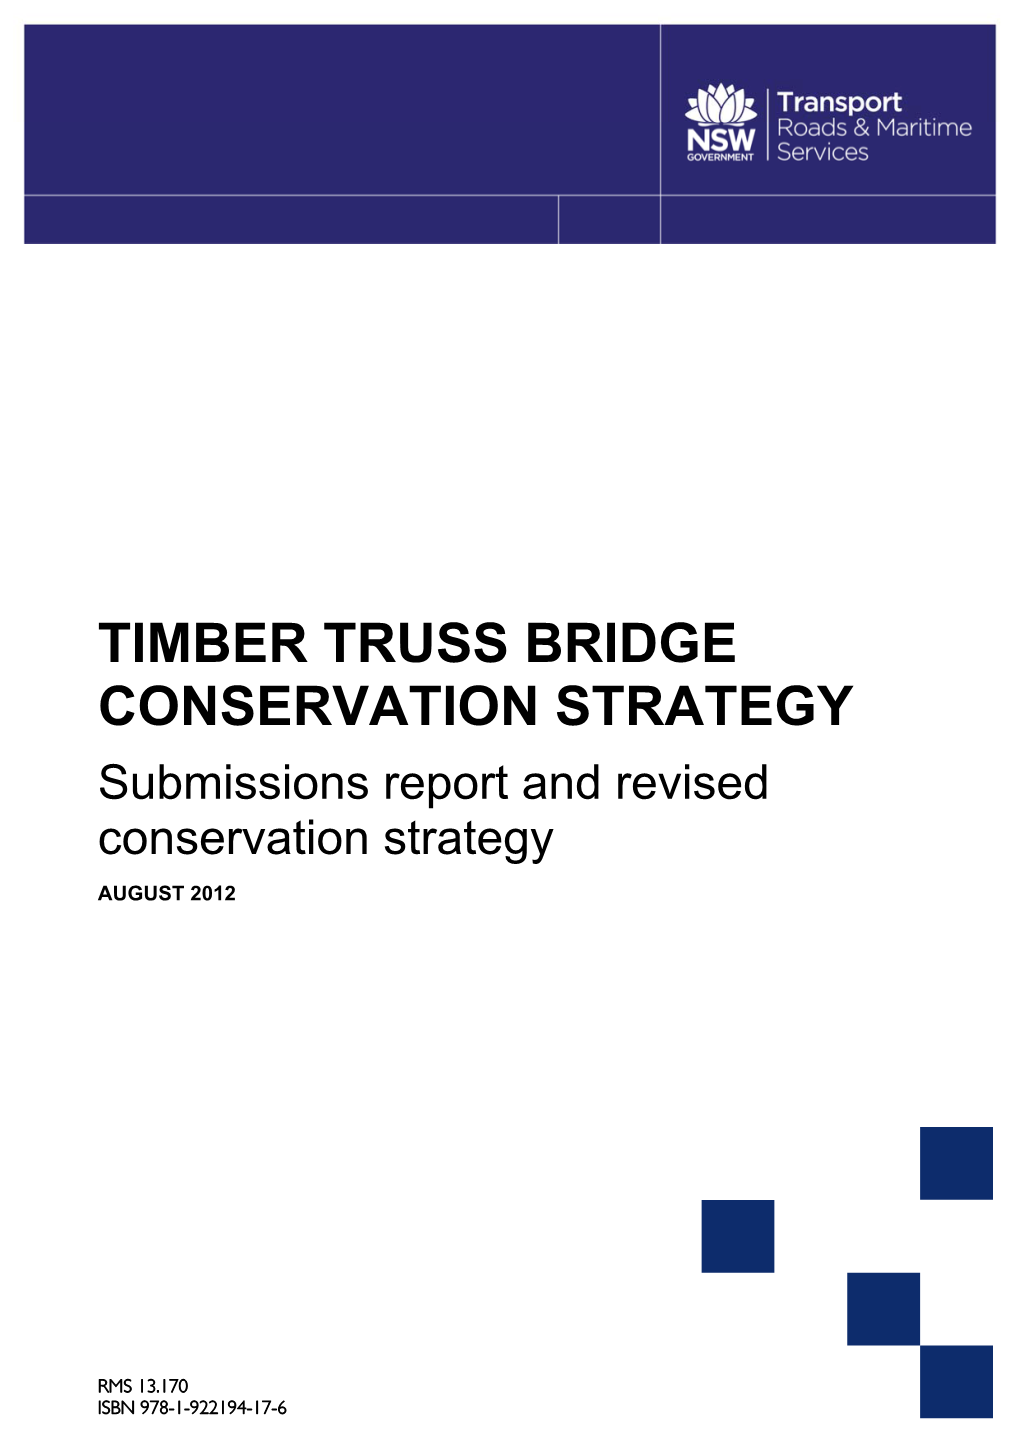 TIMBER TRUSS BRIDGE CONSERVATION STRATEGY Submissions Report and Revised Conservation Strategy AUGUST 2012